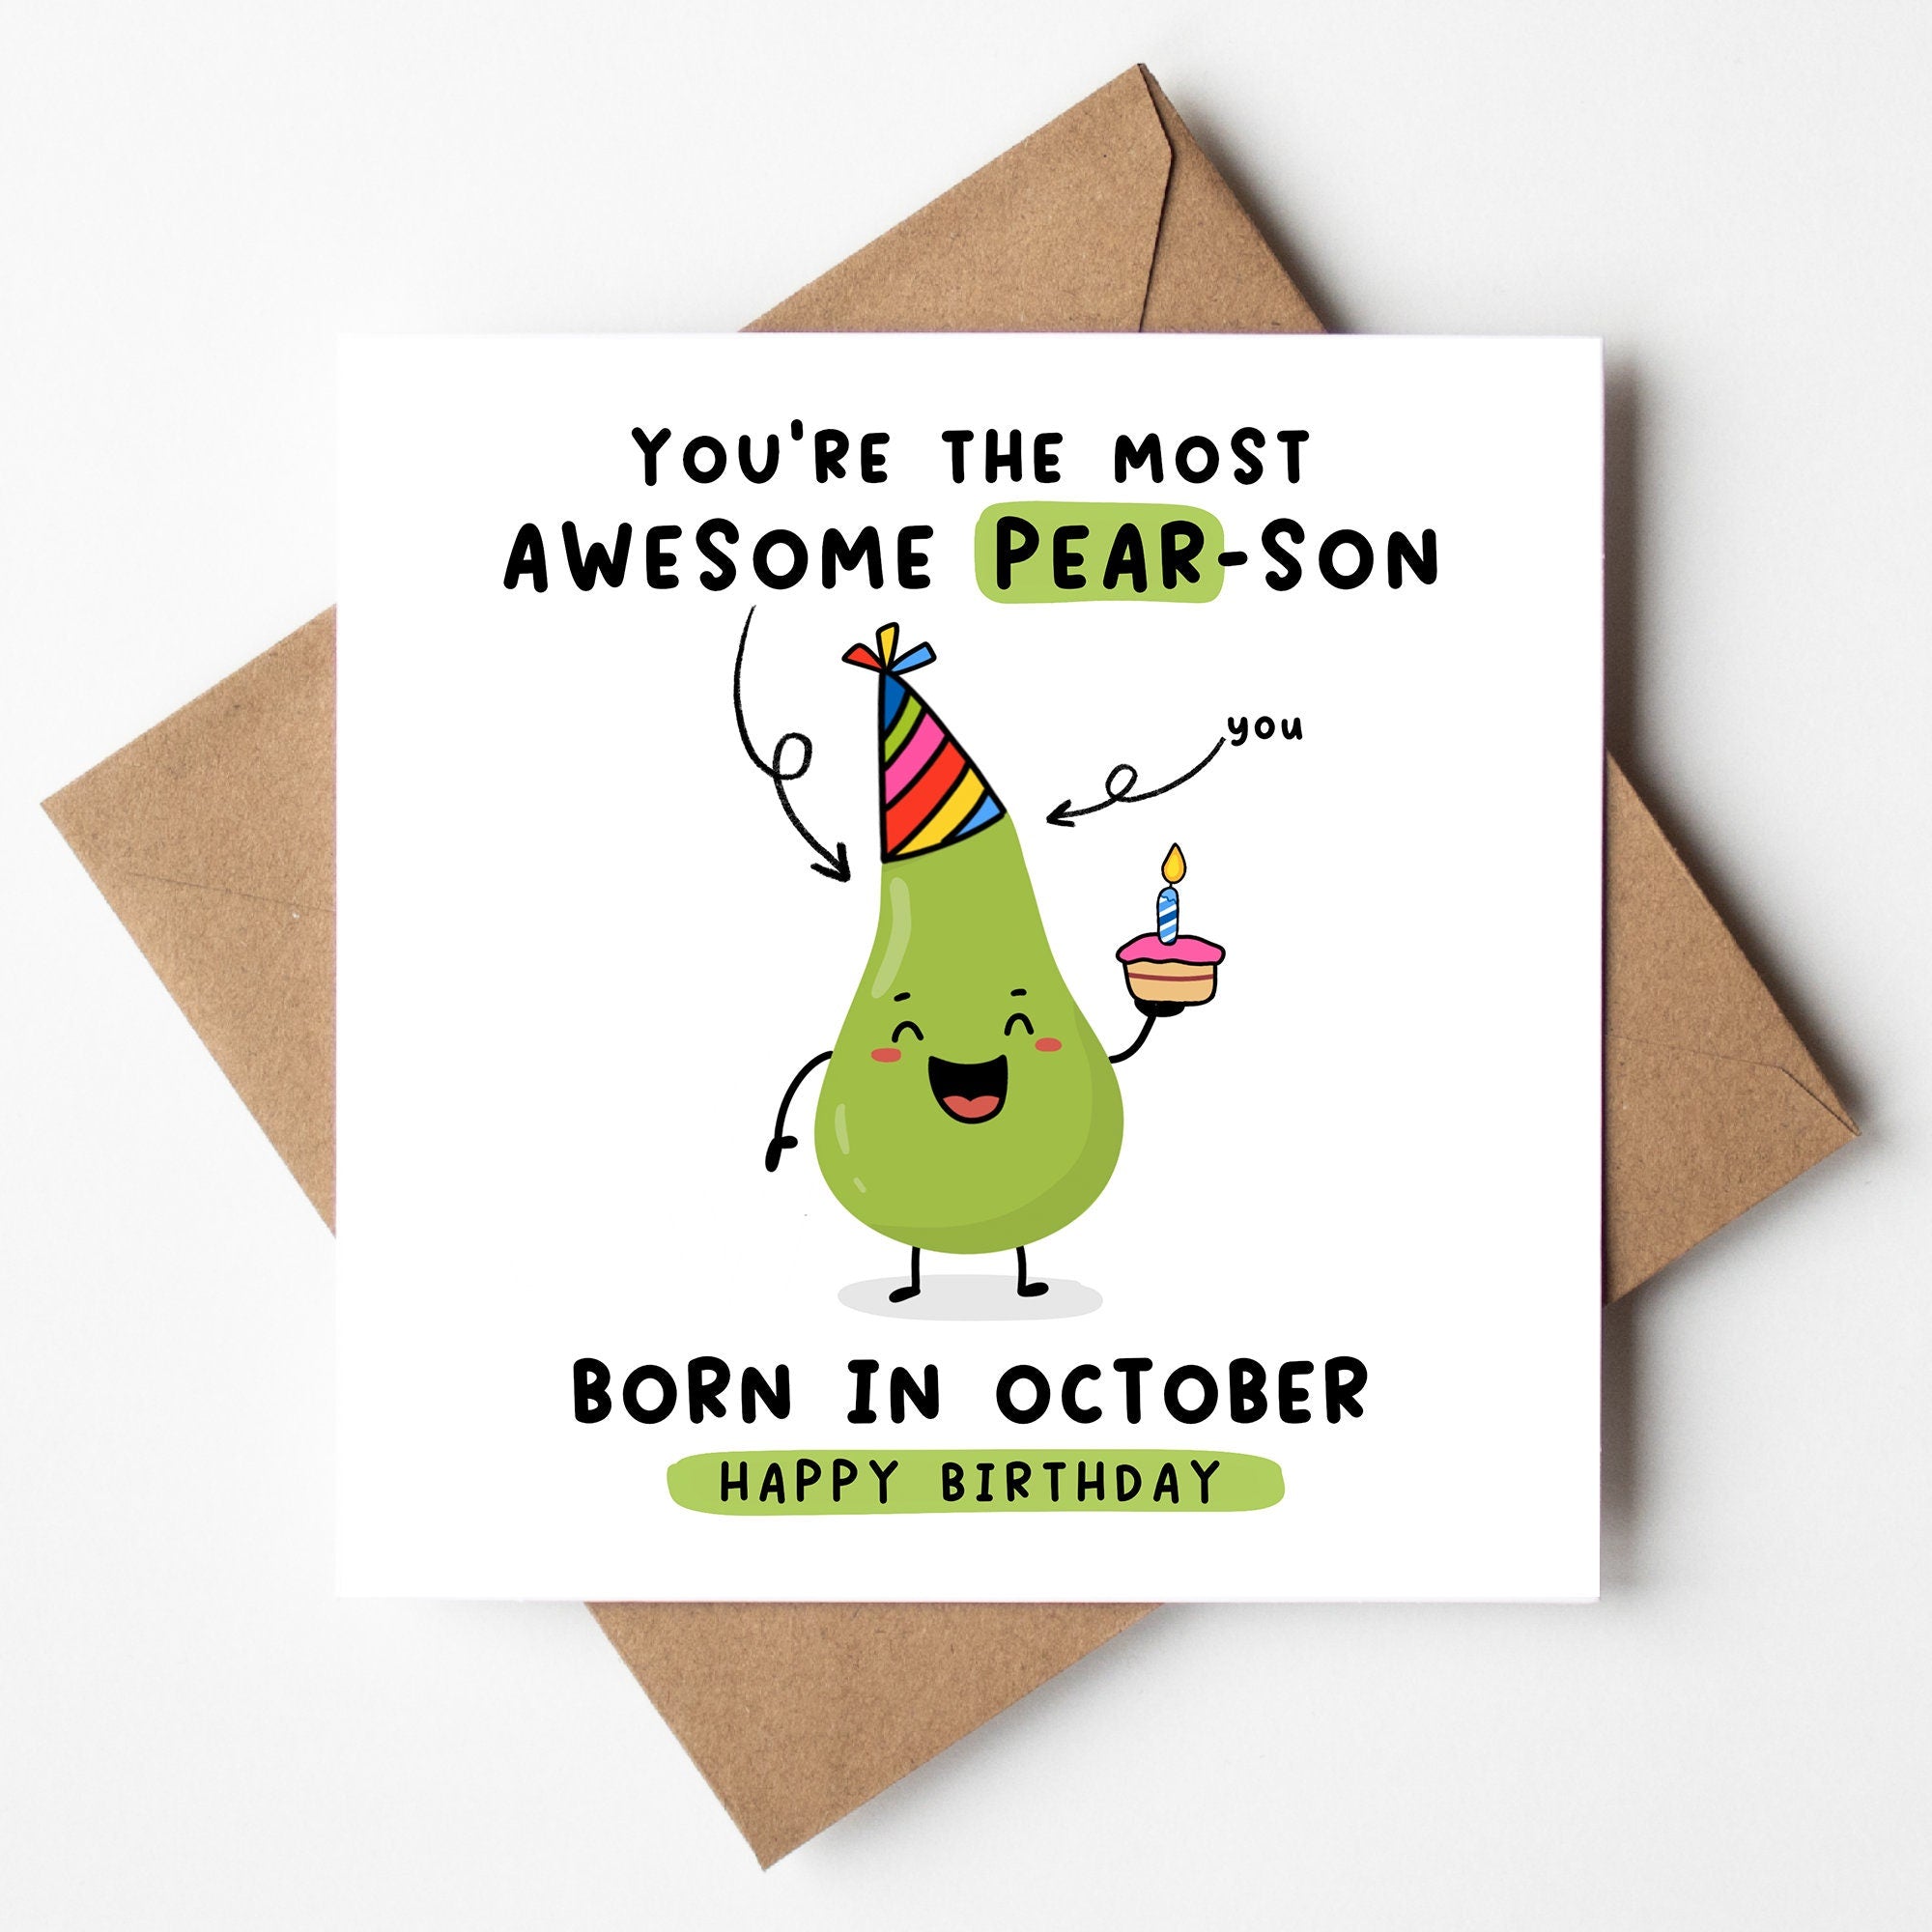 You're The Most Awesome Pear-son born in October, Funny Pun Card, Pear Pun Card, Born In October, Birth Month Card October